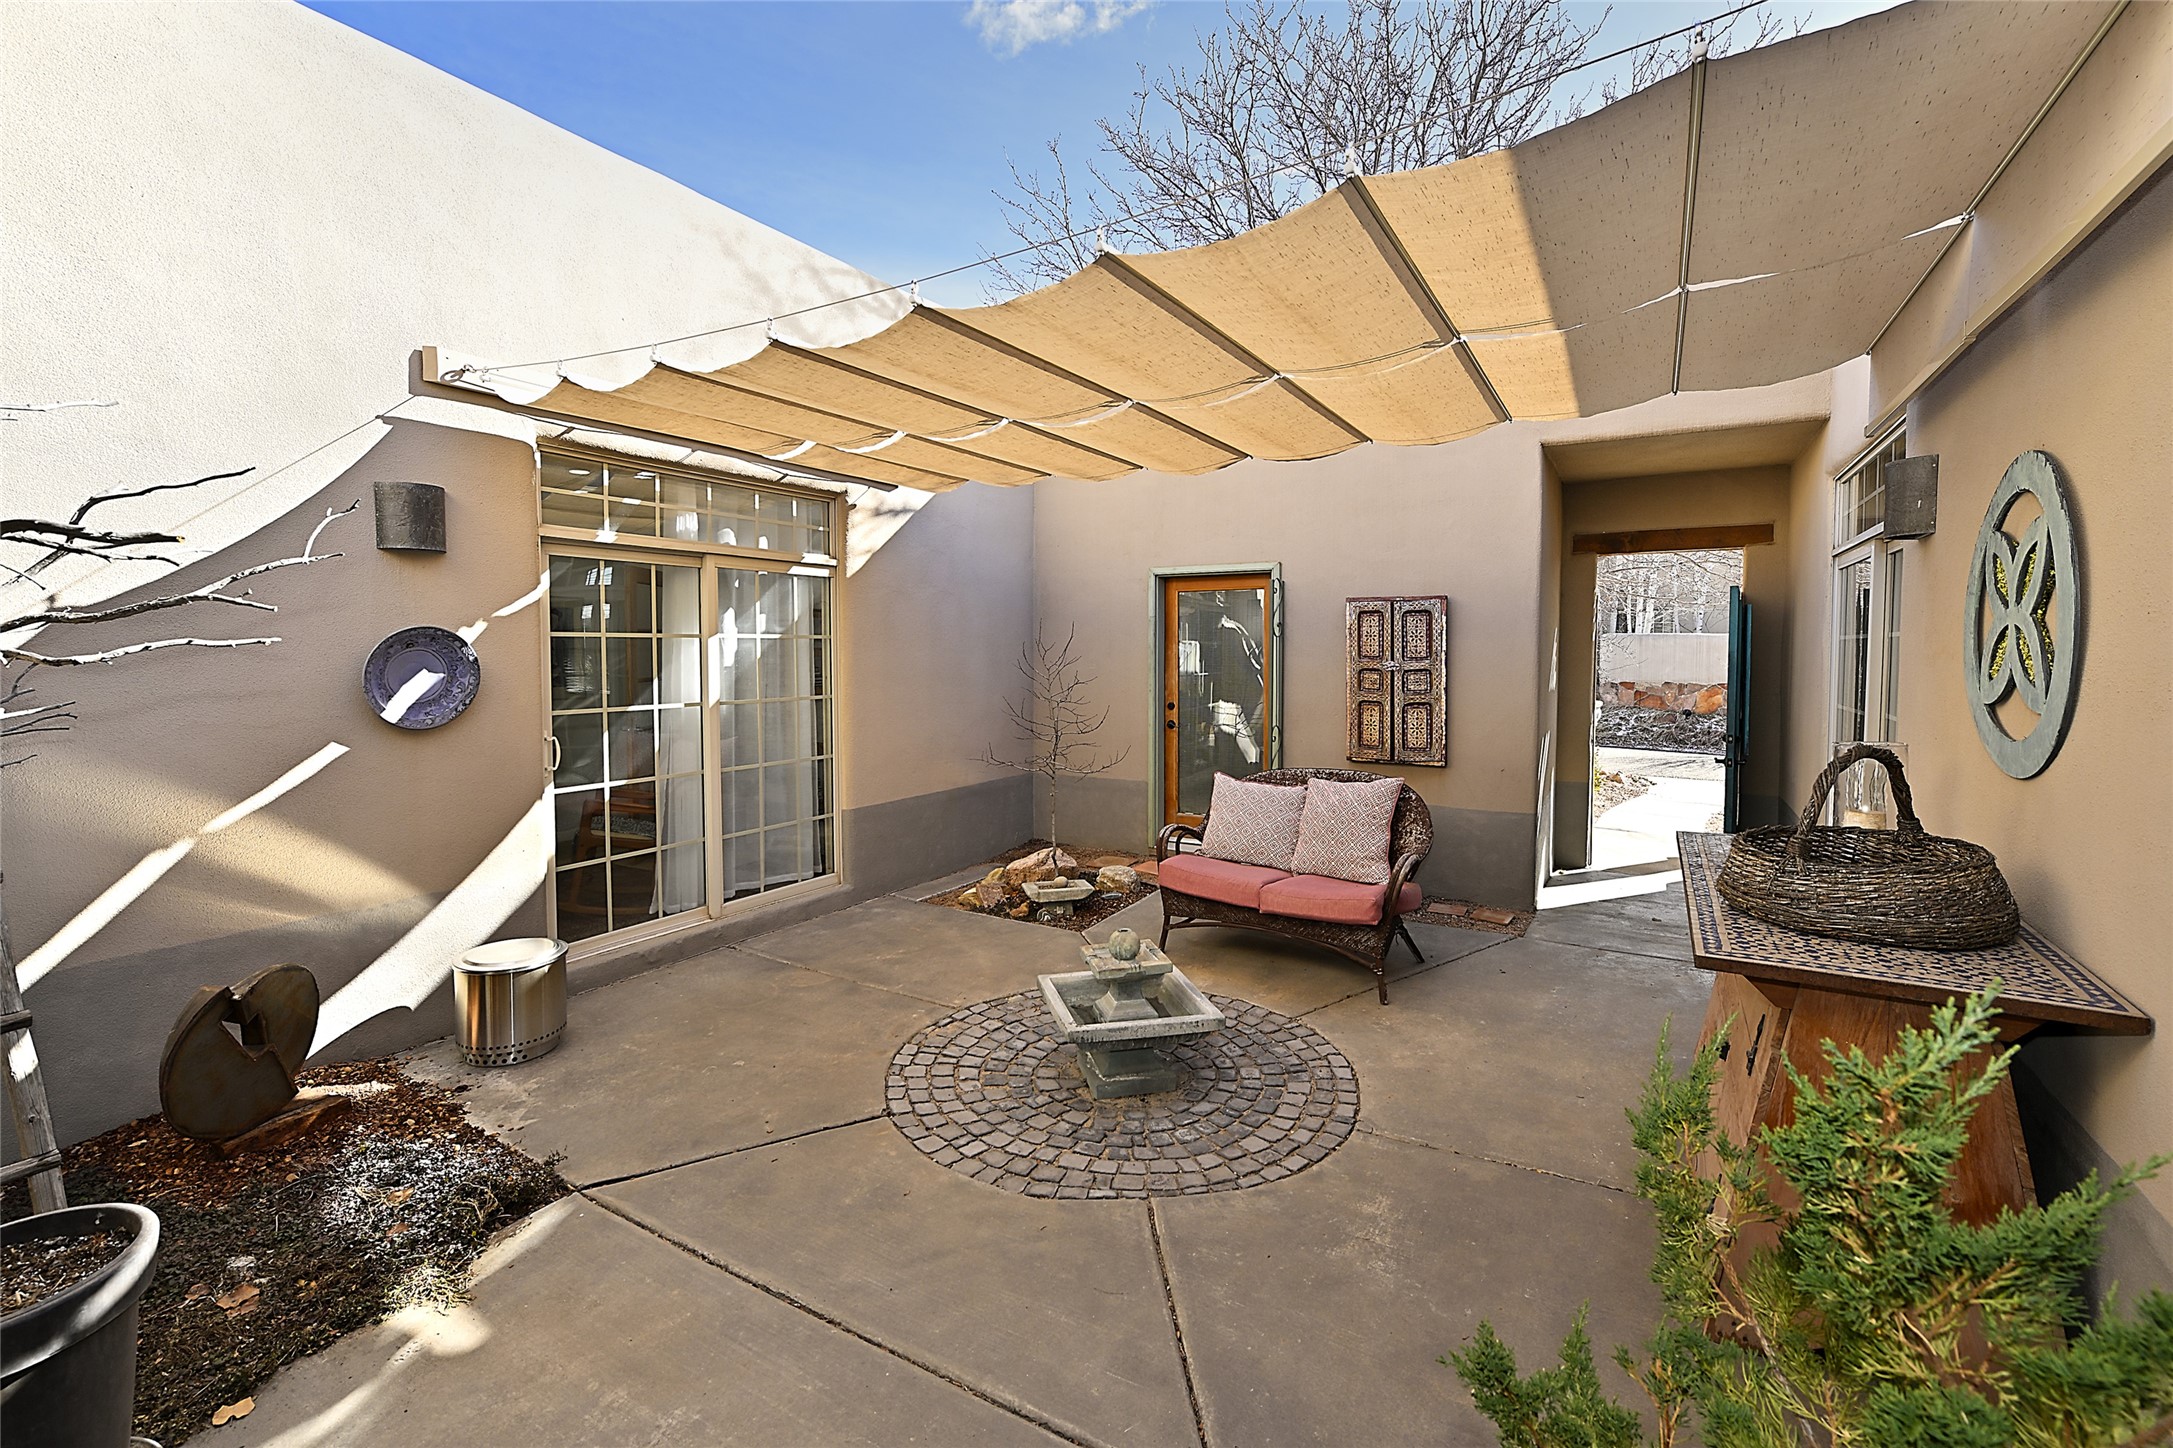 4245 Howling Wolf Lane, Santa Fe, New Mexico 87507, 3 Bedrooms Bedrooms, ,3 BathroomsBathrooms,Residential,For Sale,4245 Howling Wolf Lane,202401107